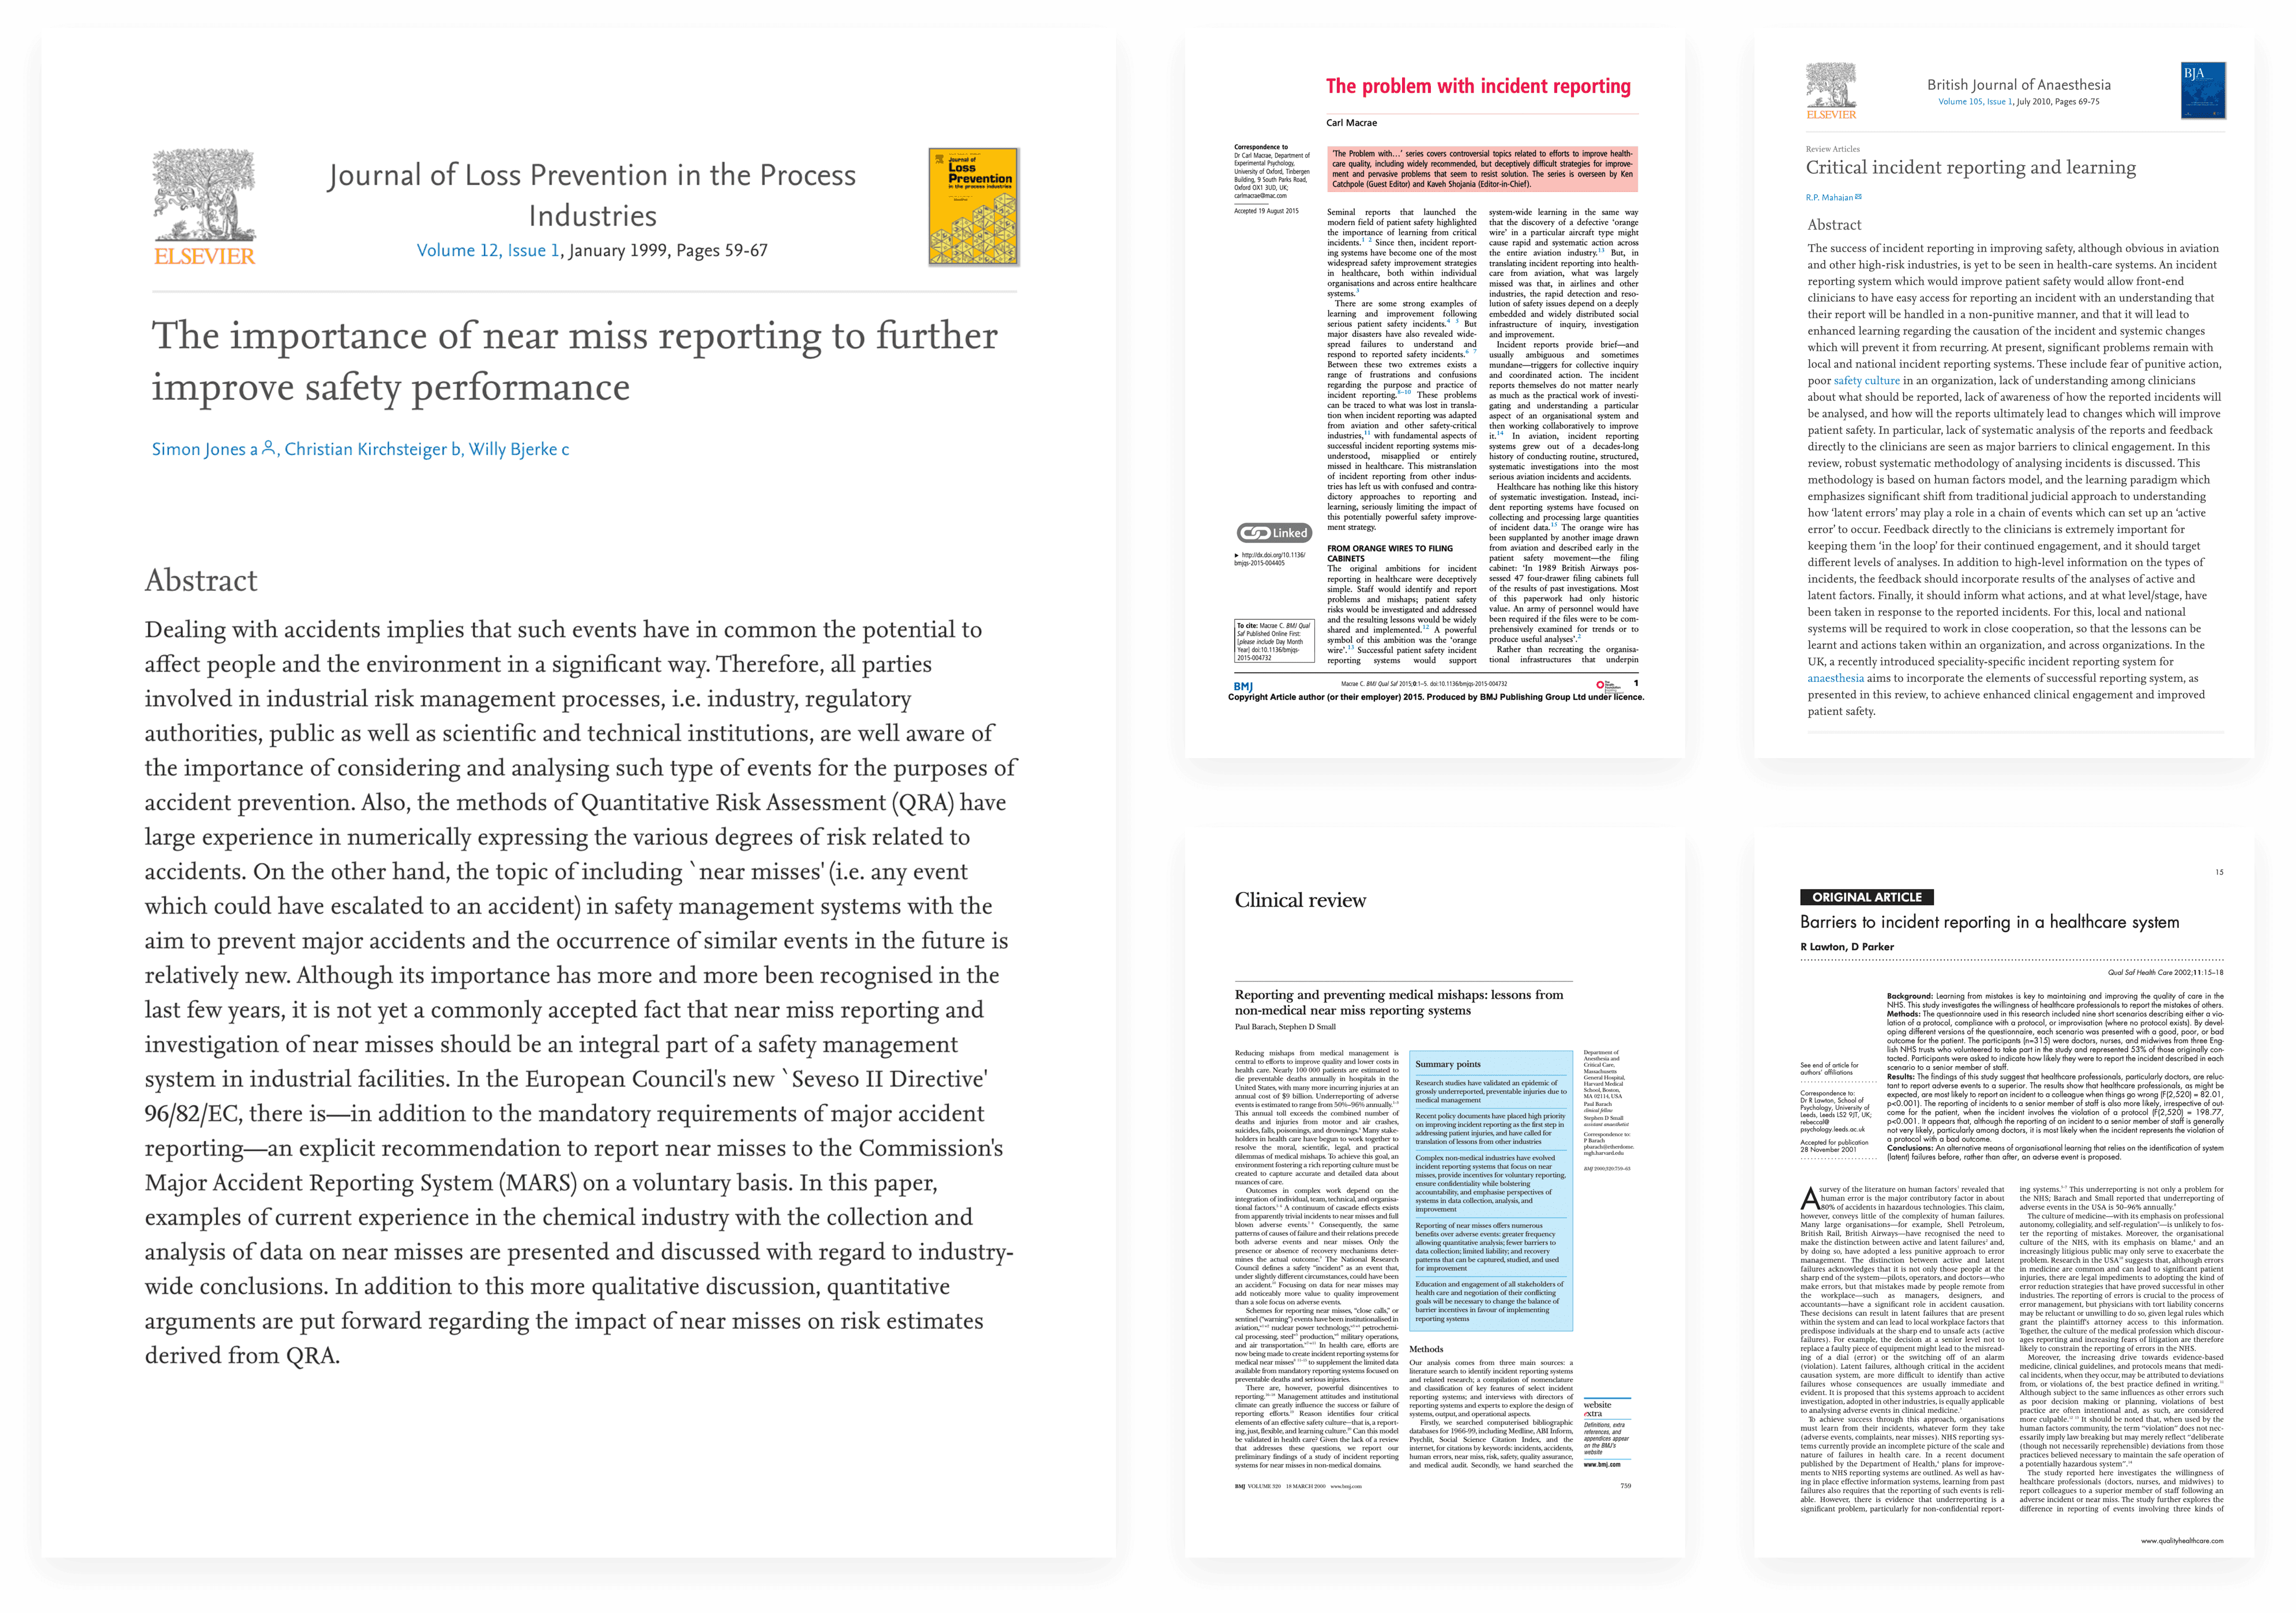 Academic articles used in the design of app prototype.